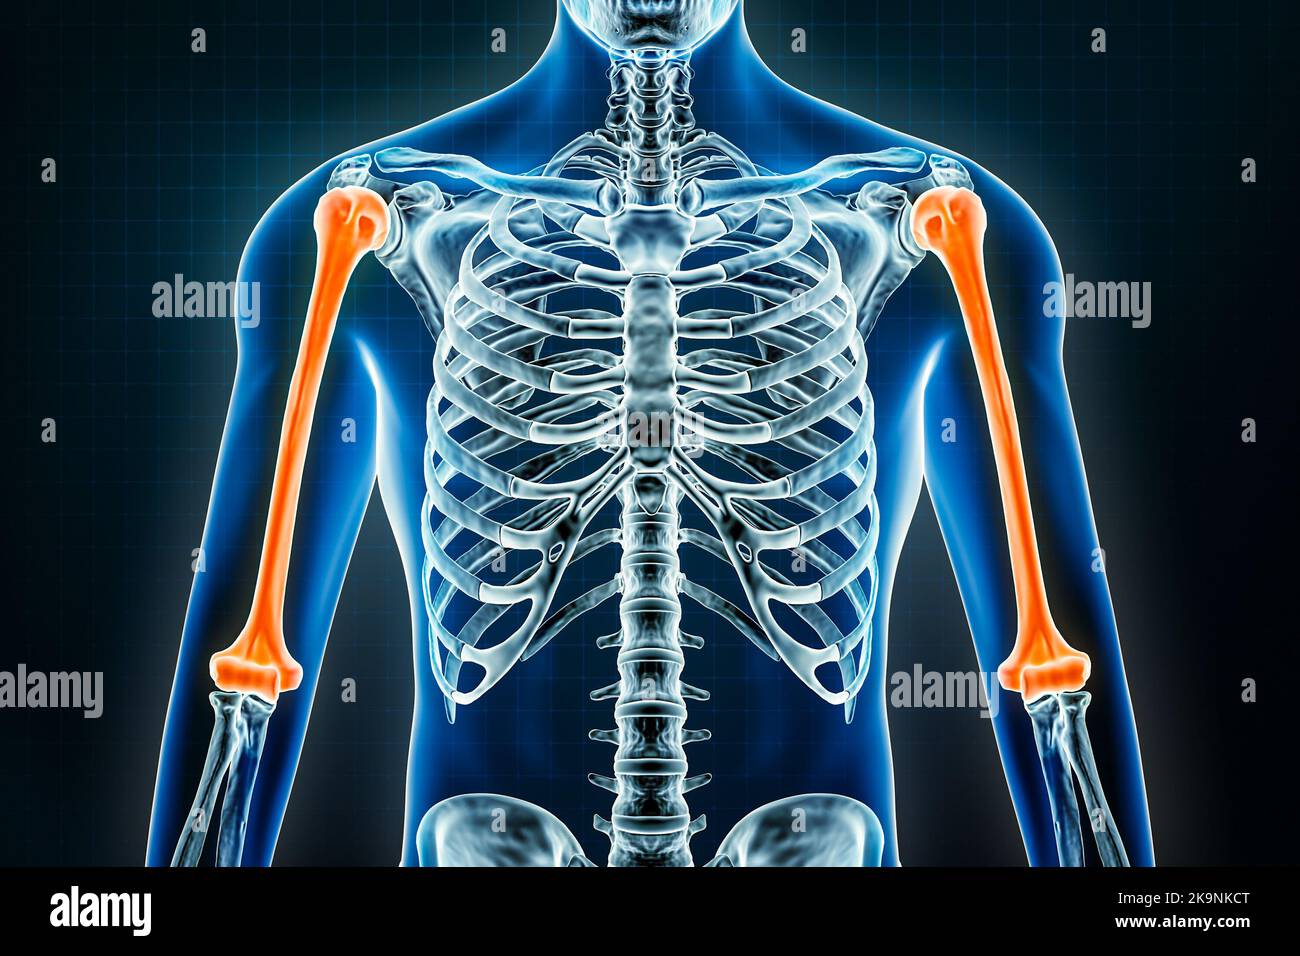 Humerus x-ray. Osteology of the human skeleton, arm or upper limb bones and 3D rendering illustration. Anatomy, medical, science, biology, healthcare Stock Photo